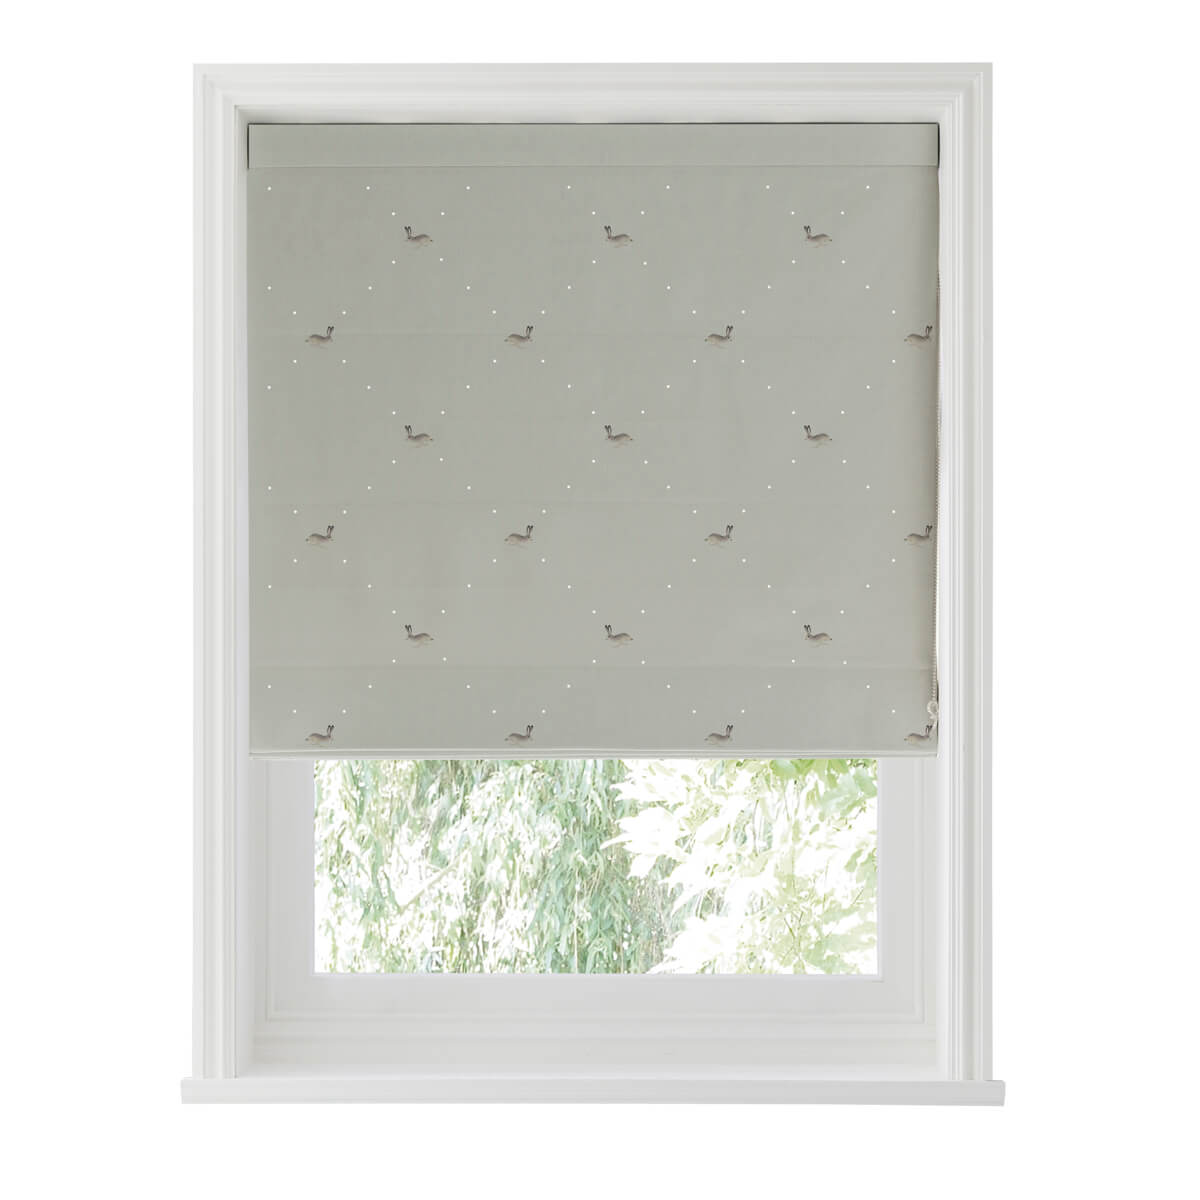 Hare Dove Made to Measure Roman Blind